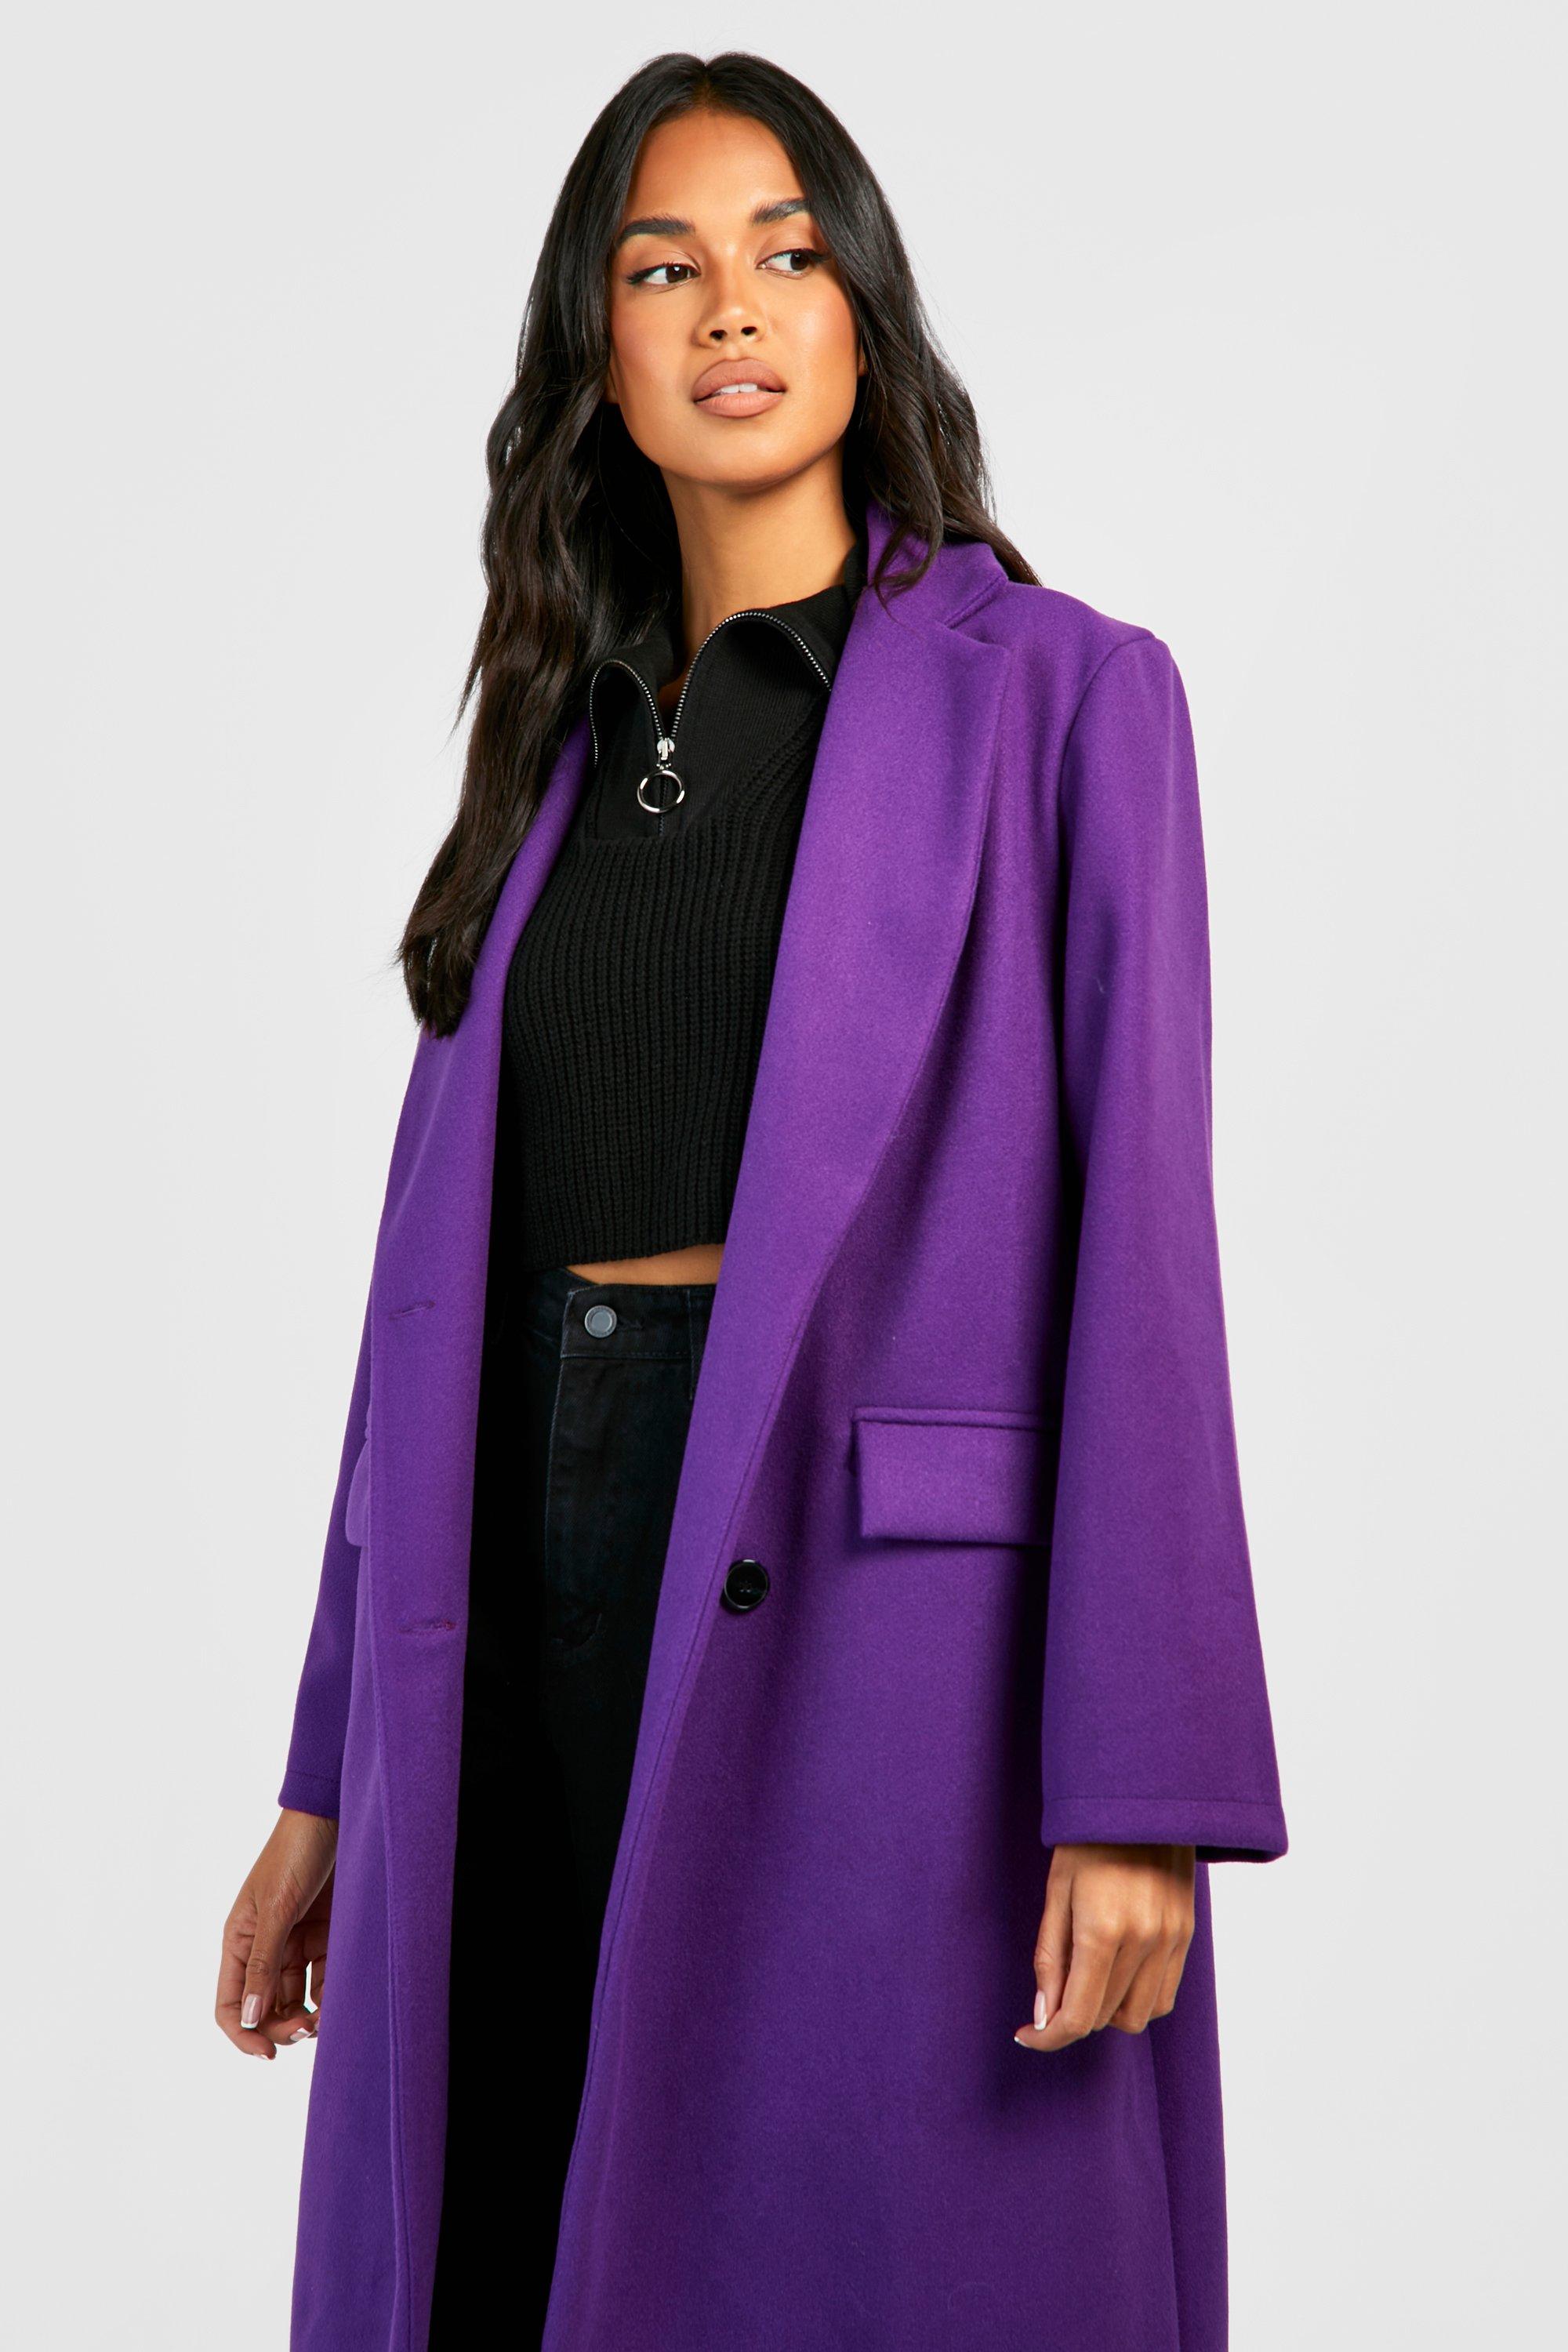 M And S Purple Coat | vlr.eng.br